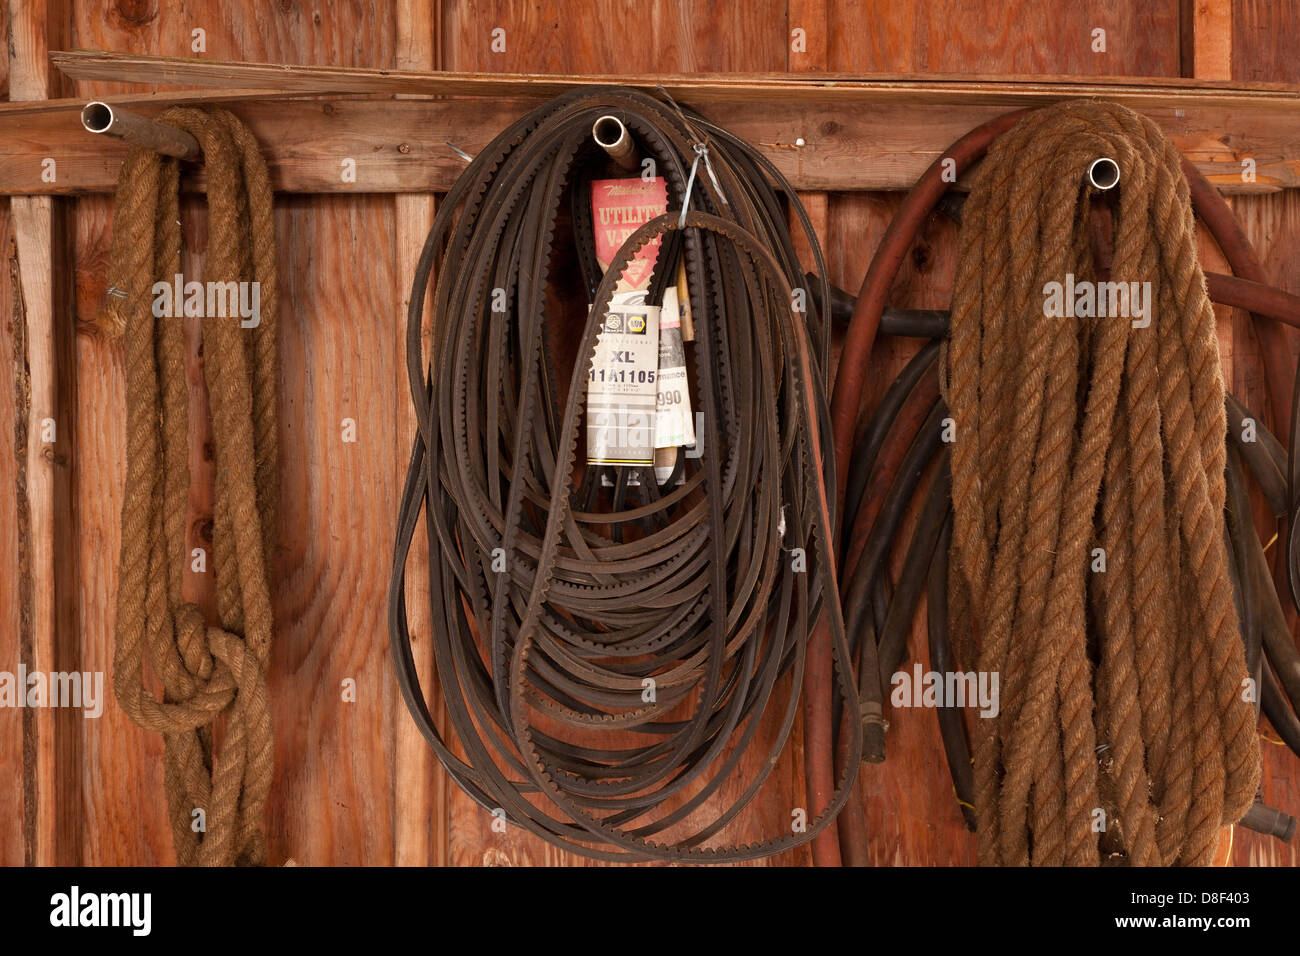 Serpentine belts and thick rope hanging in an old shed Stock Photo - Alamy